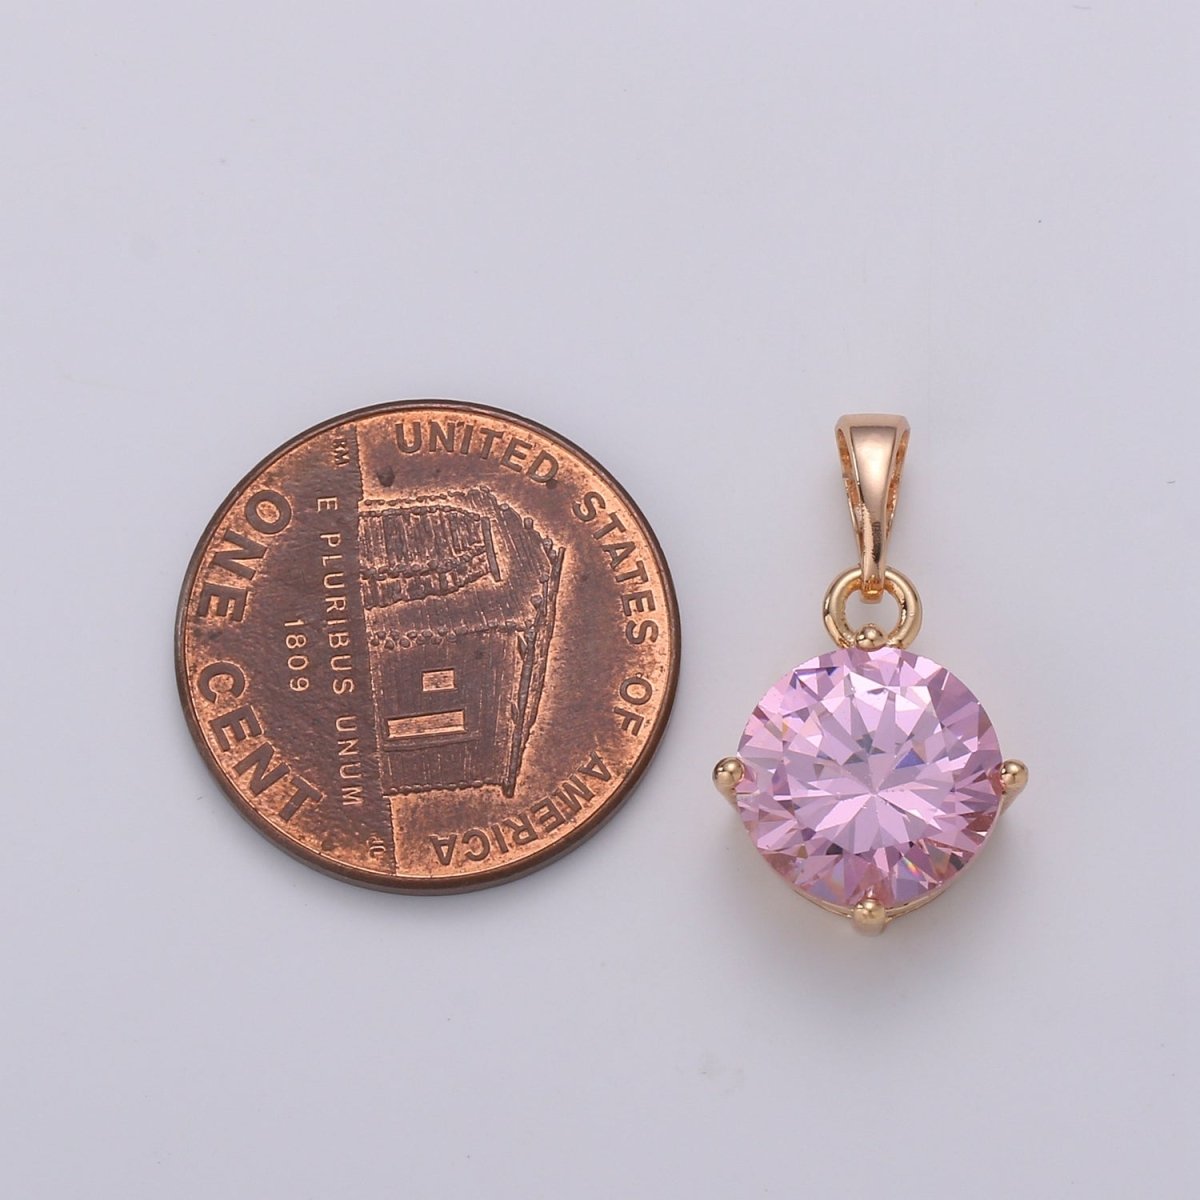 DEL- Gemstone Round Charm, Pink Solitaire Cz Pendant, 20x10mm, 18k Gold Filled Pendant Dangle Jewelry, Necklace Earring Valentine Gift J-098 - DLUXCA